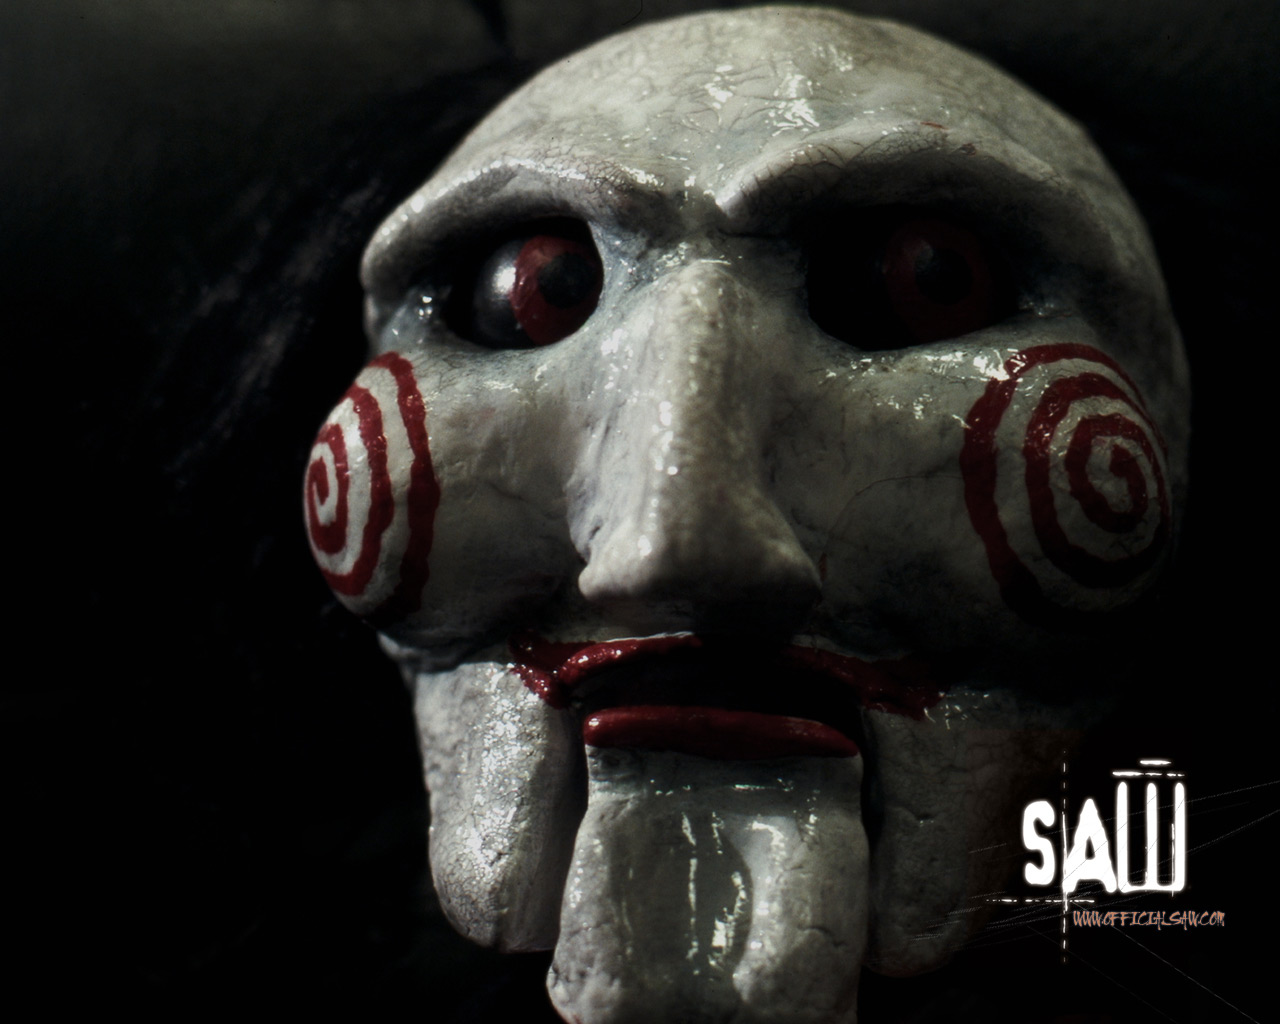 Wallpaper Of Saw And 3d